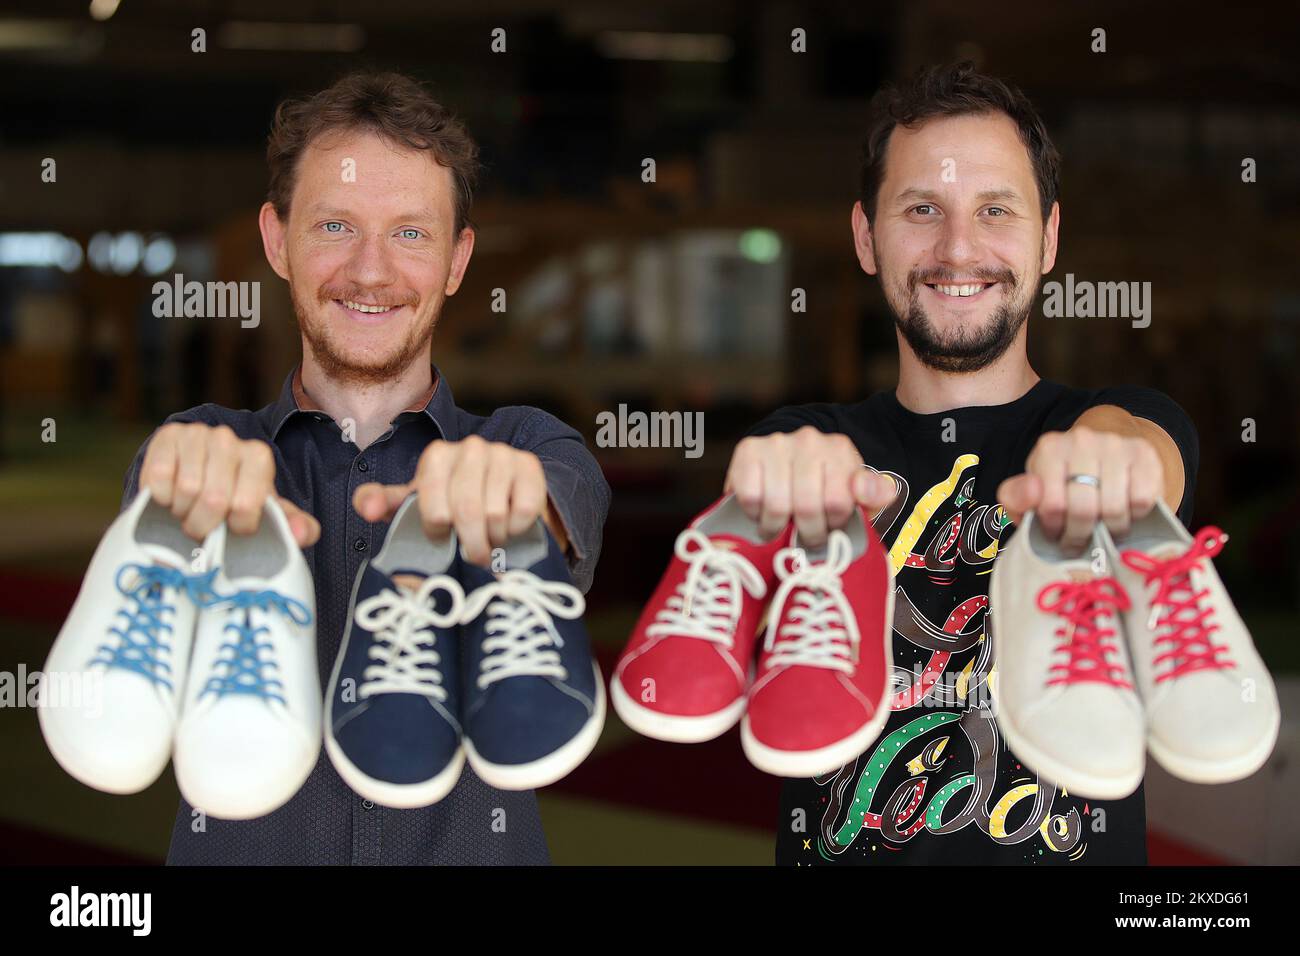 04.09.2019., Zagreb, Croatia - Domagoj and Hrvoje Boljar from Duga Resa founded Miret and operate within the EIT Climate-KIC accelerator dedicated to fostering climate-friendly startups. The inspiration came from the brothersâ€™ late father Josip JoÅ¾a Boljar, who began producing shoes in the 90s and eventually built a business with more than 100 employees.. Through their company Miret, they developed an eco-tennis brand that is almost completely biodegradable and was started with the EIT Climate-KIC accelerator, the largest European launcher acceleration program that develops solutions which Stock Photo